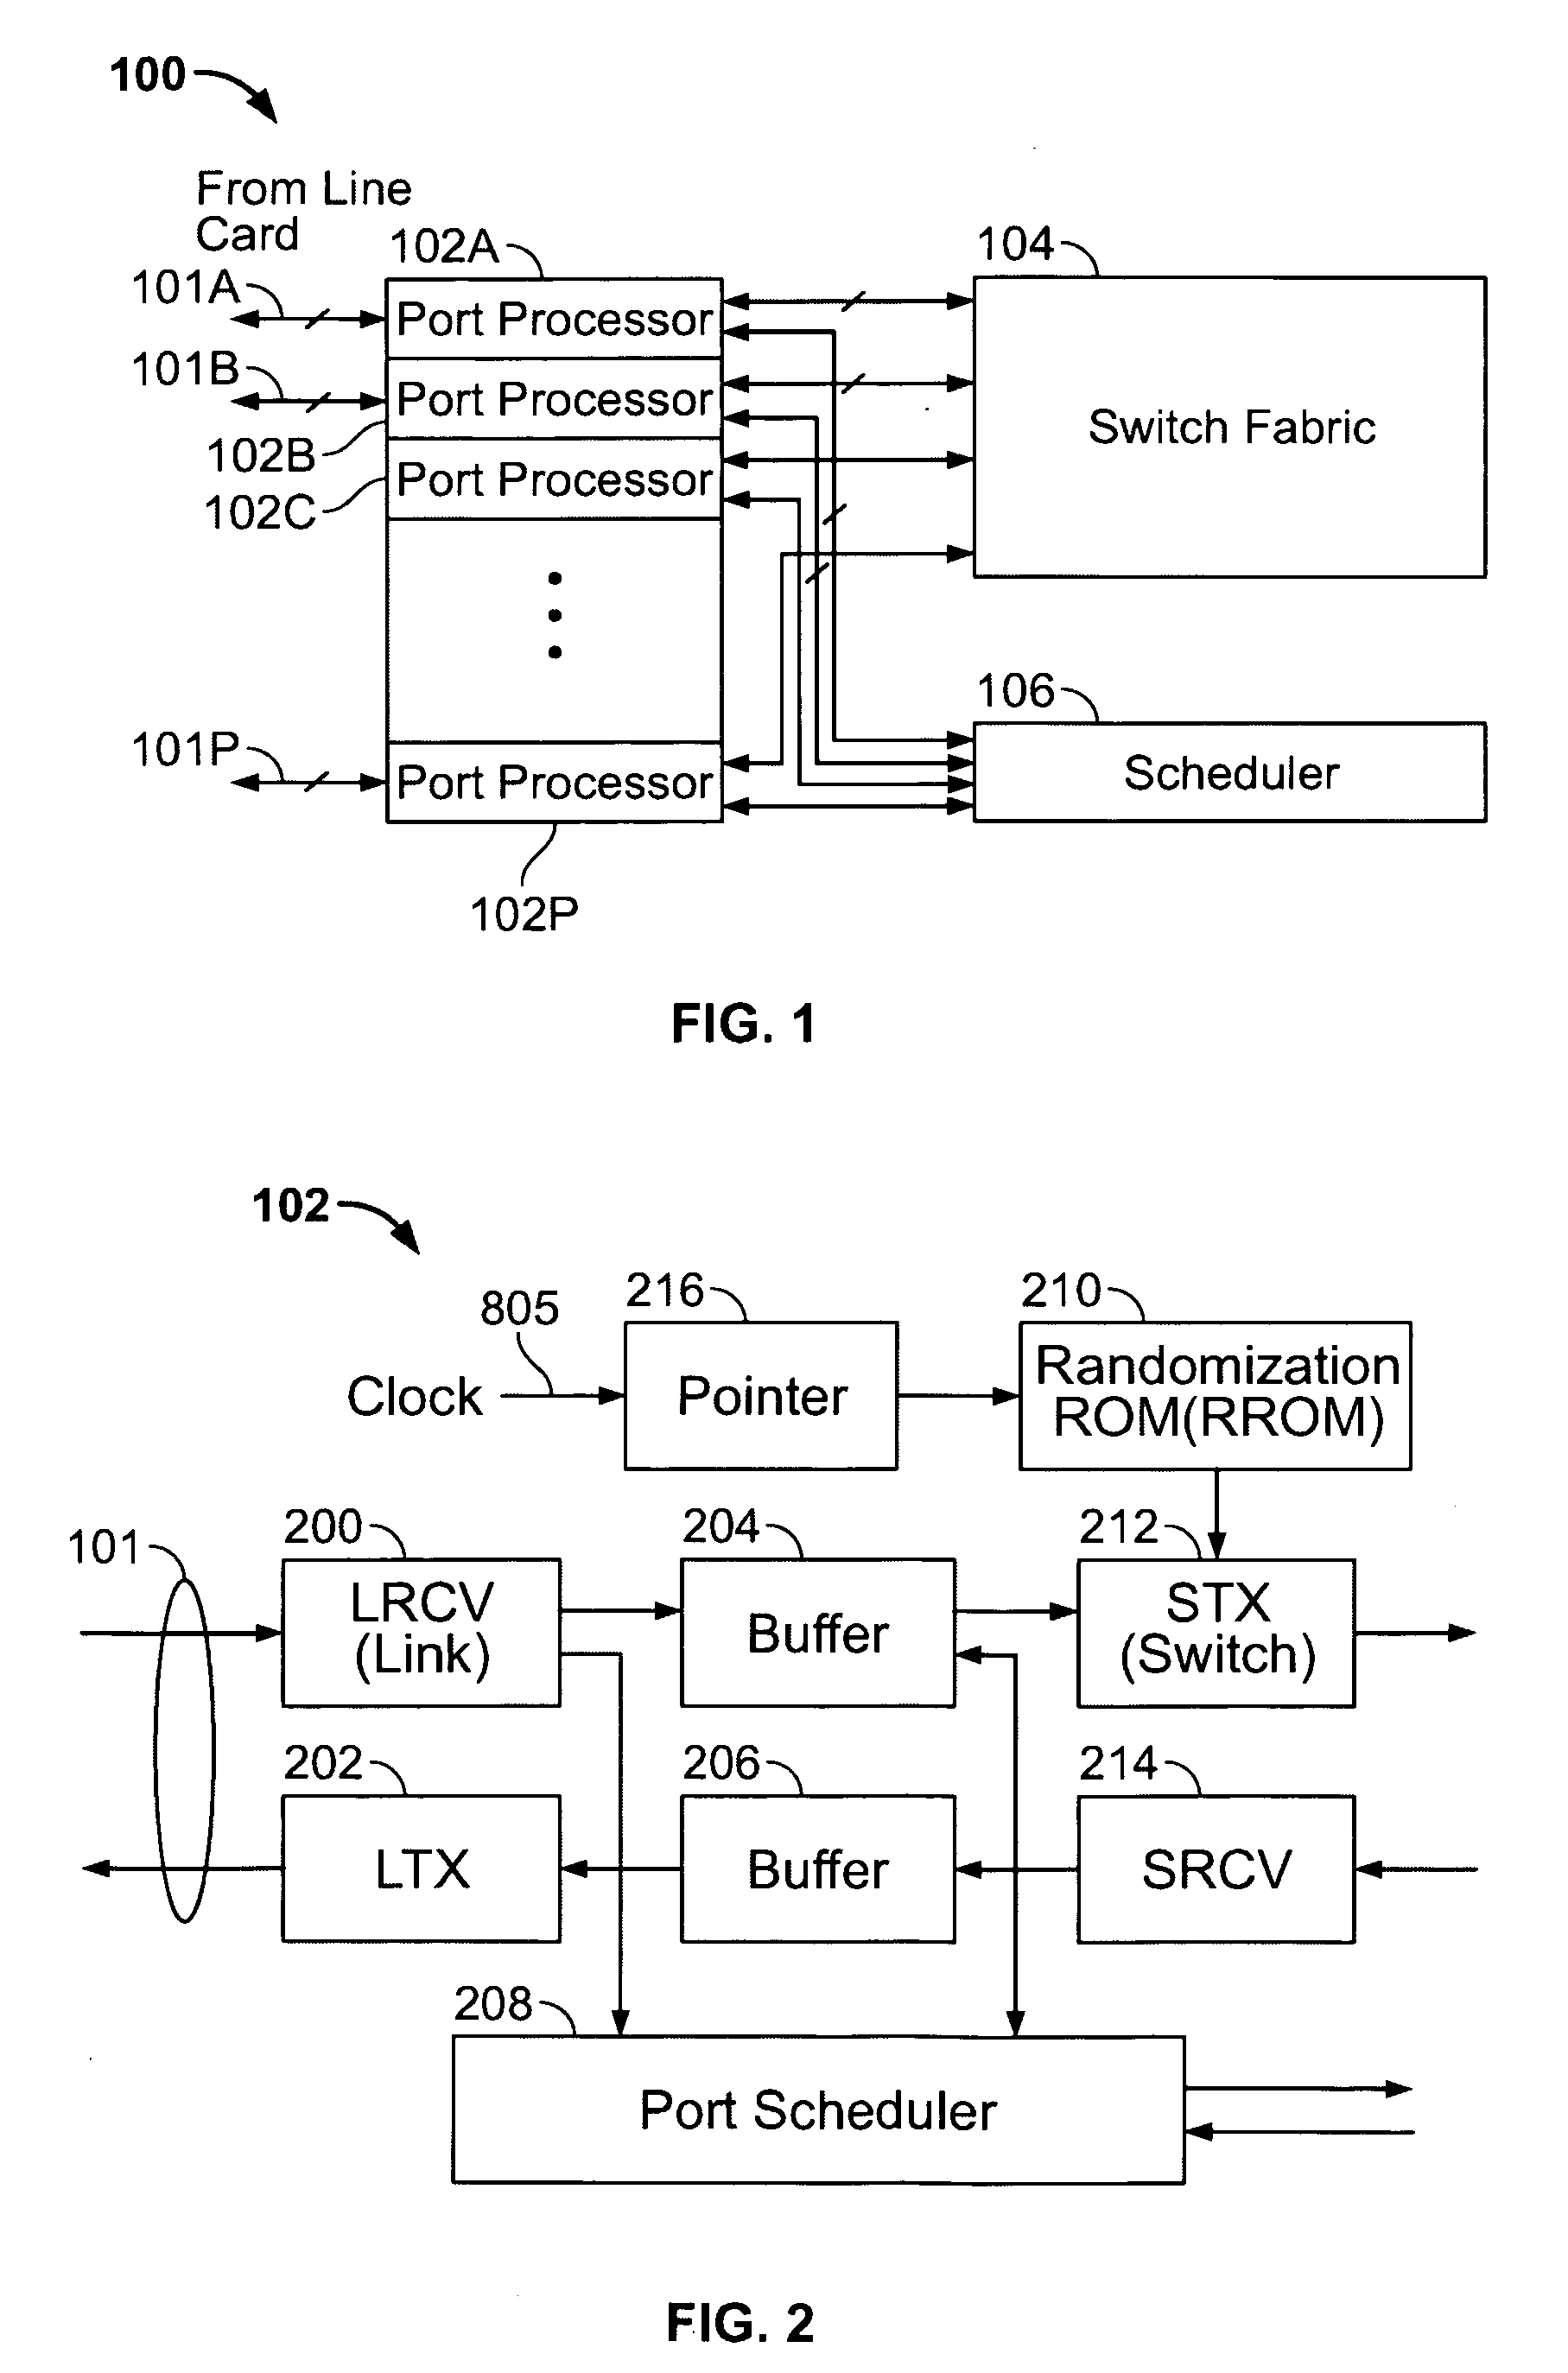 Configurable virtual output queues in a scalable switching system